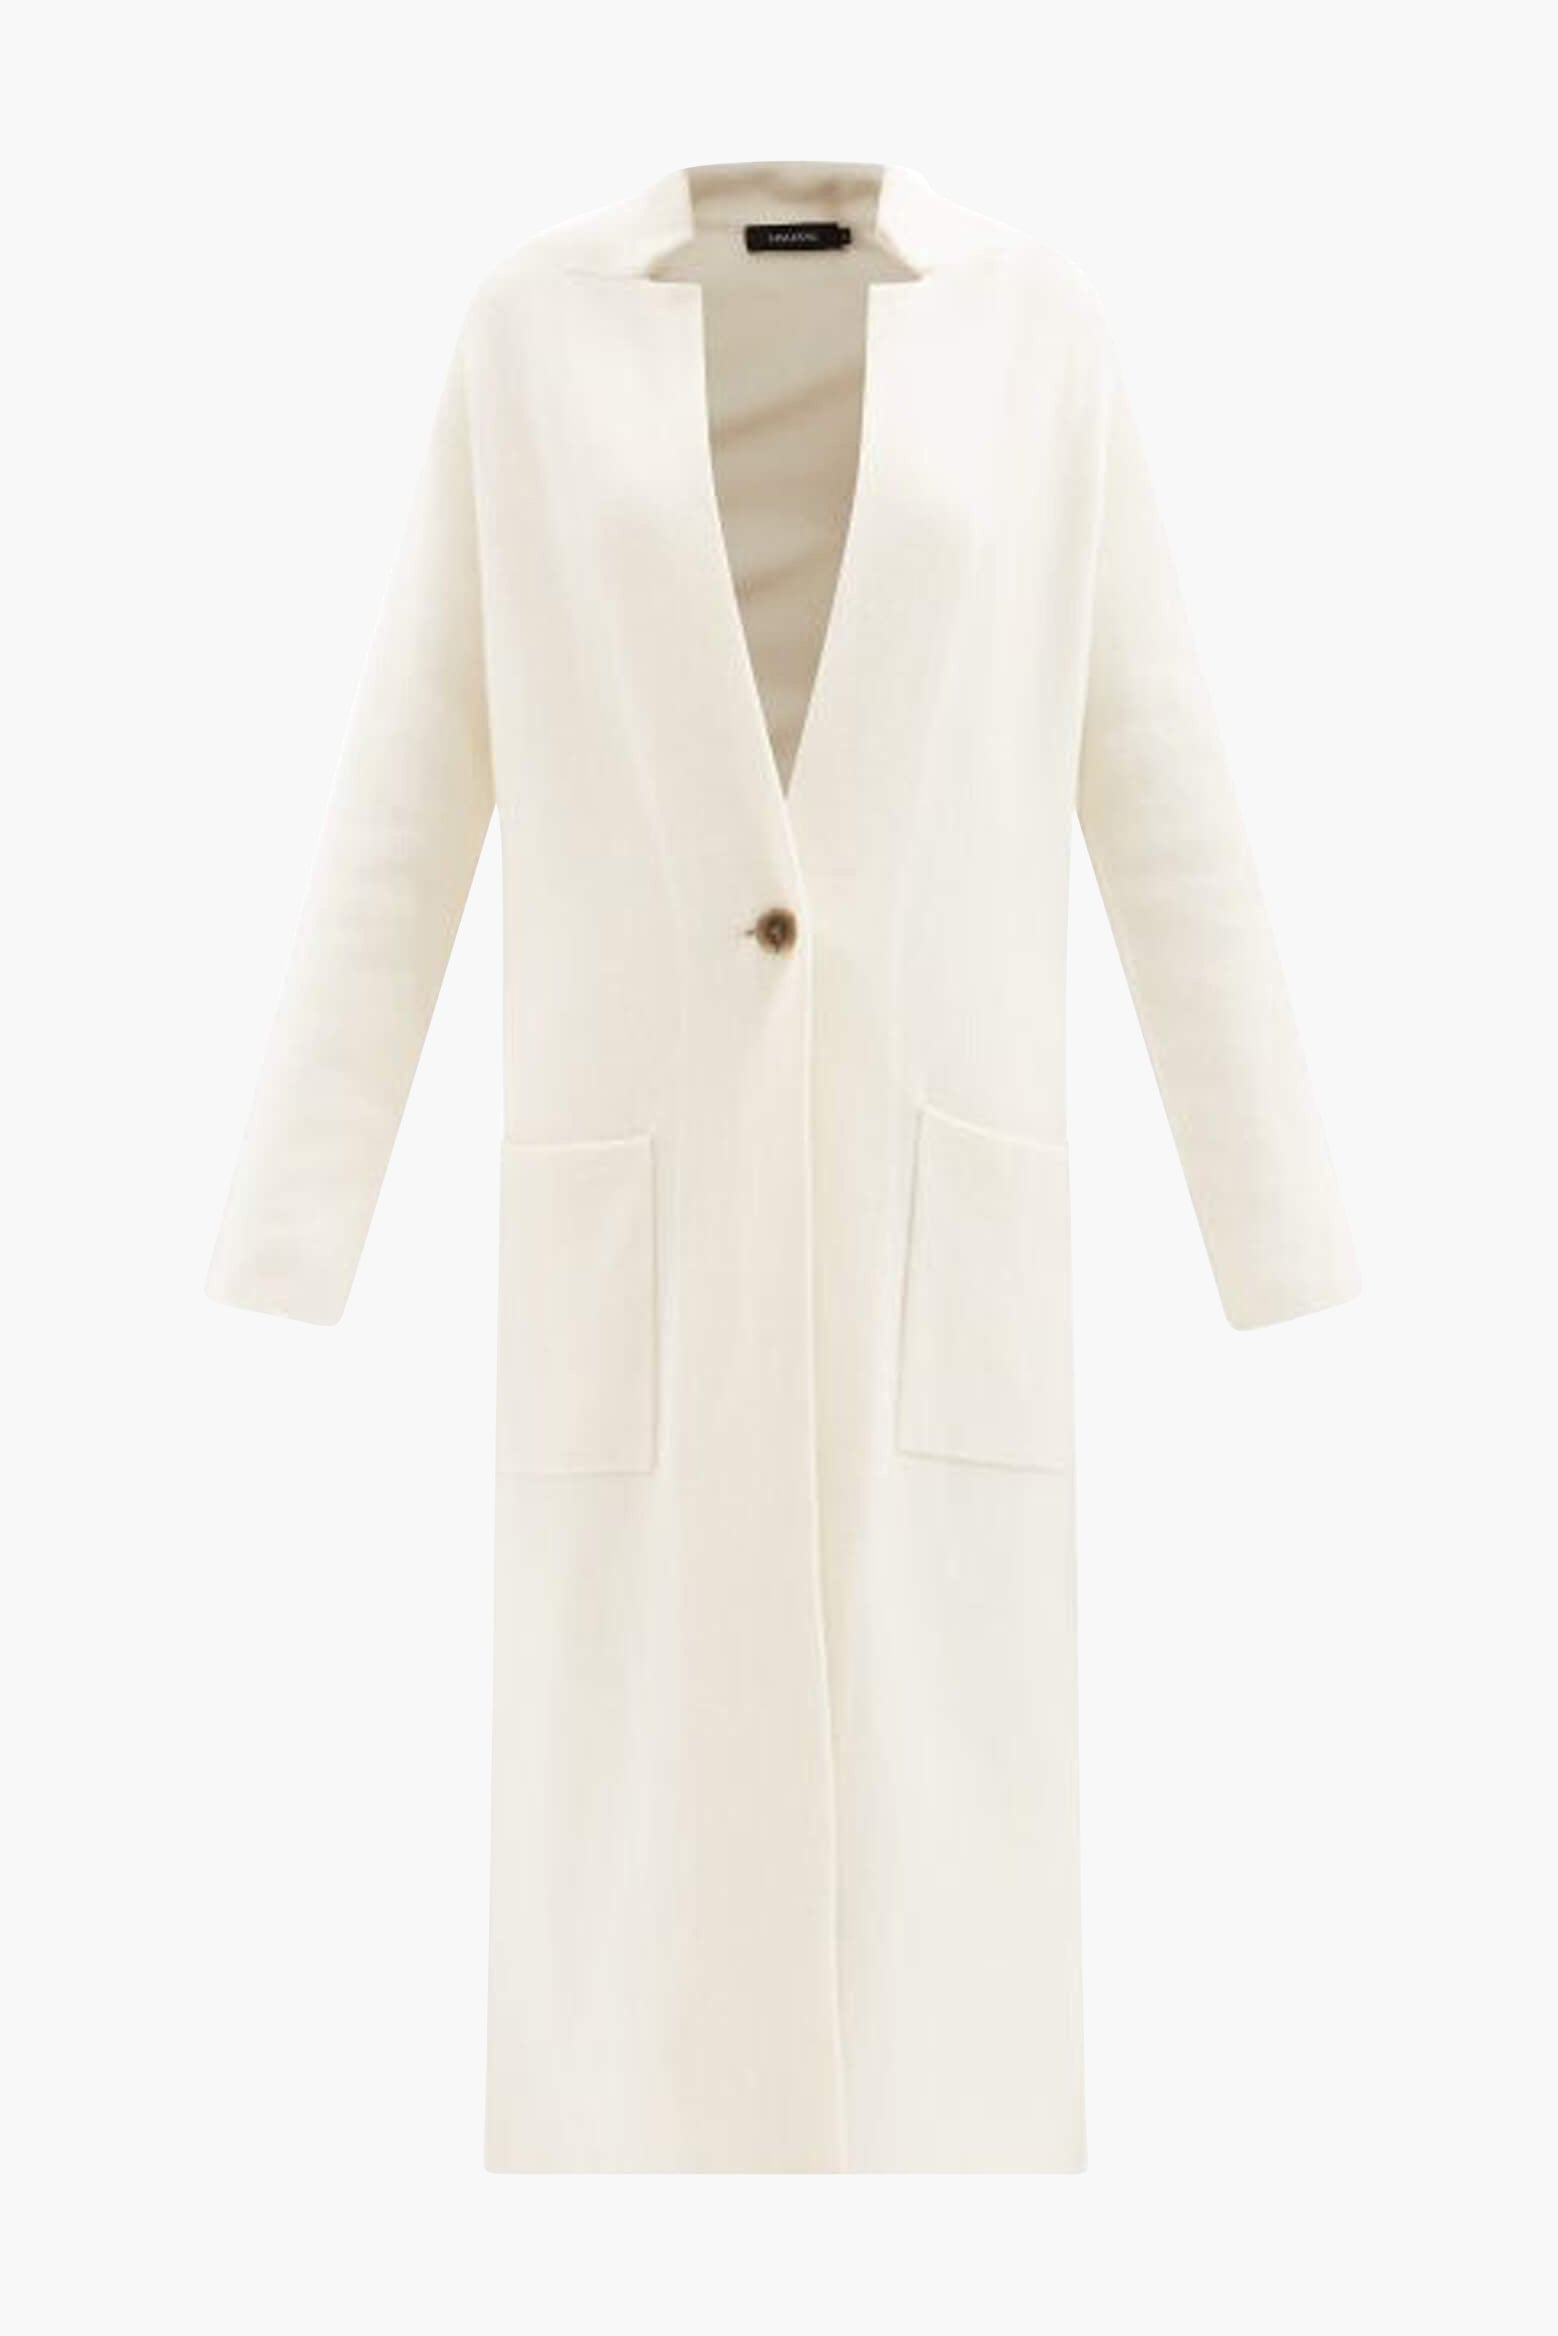 Lisa Yang Amie Cardigan Coat in Cream available at TNT The New Trend Australia. Free shipping on orders over $300 AUD.